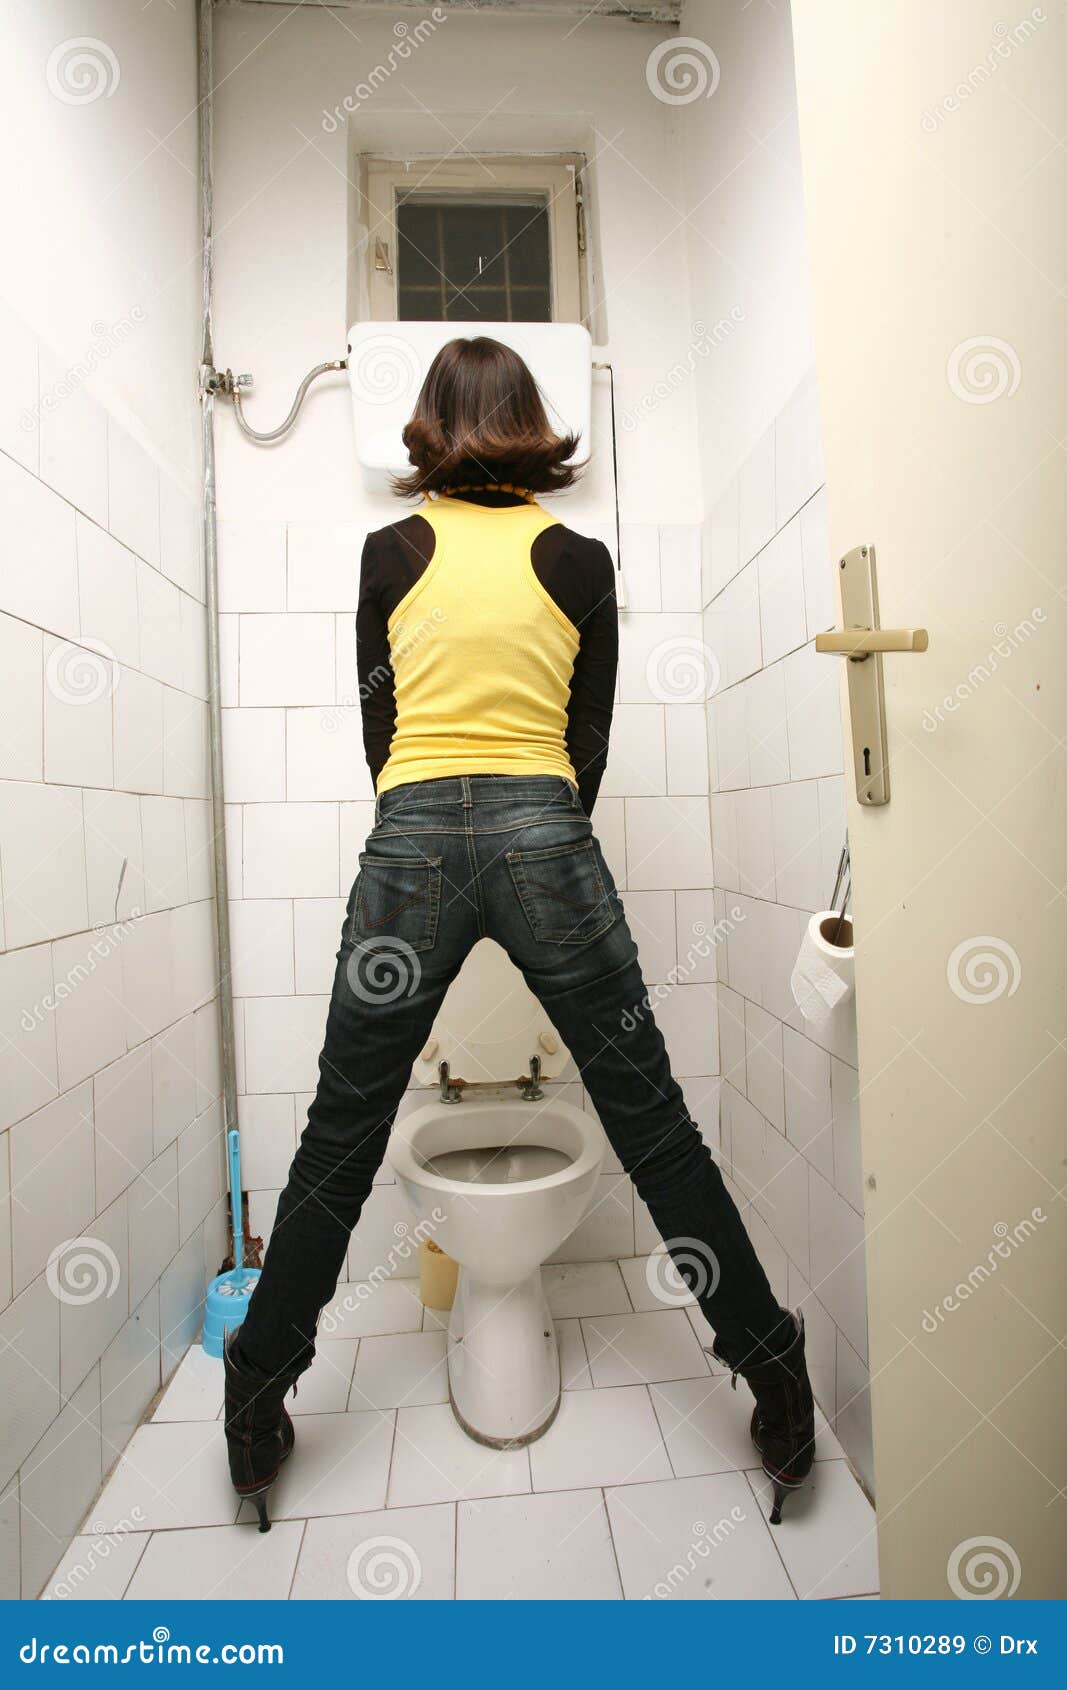 real girls and ladies peeing